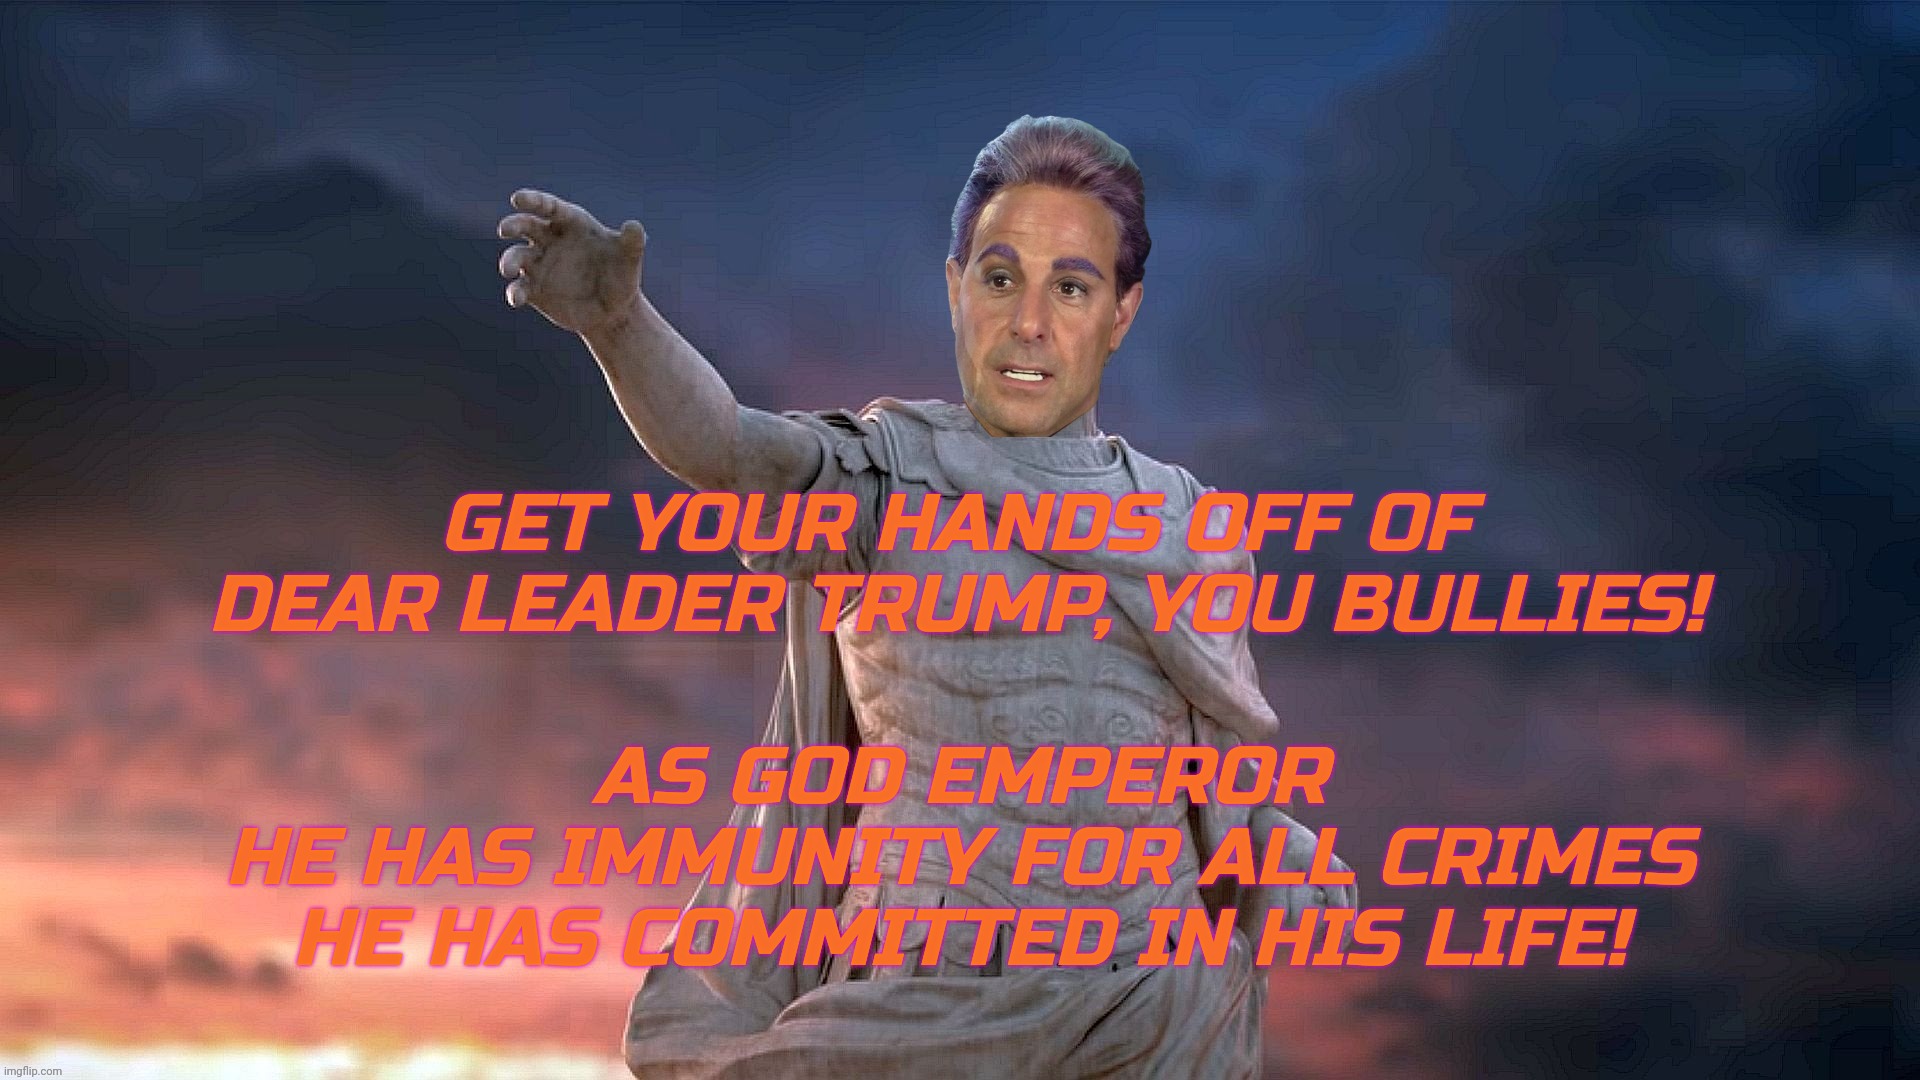 GET YOUR HANDS OFF OF
DEAR LEADER TRUMP, YOU BULLIES! AS GOD EMPEROR
HE HAS IMMUNITY FOR ALL CRIMES HE HAS COMMITTED IN HIS LIFE! | image tagged in c | made w/ Imgflip meme maker